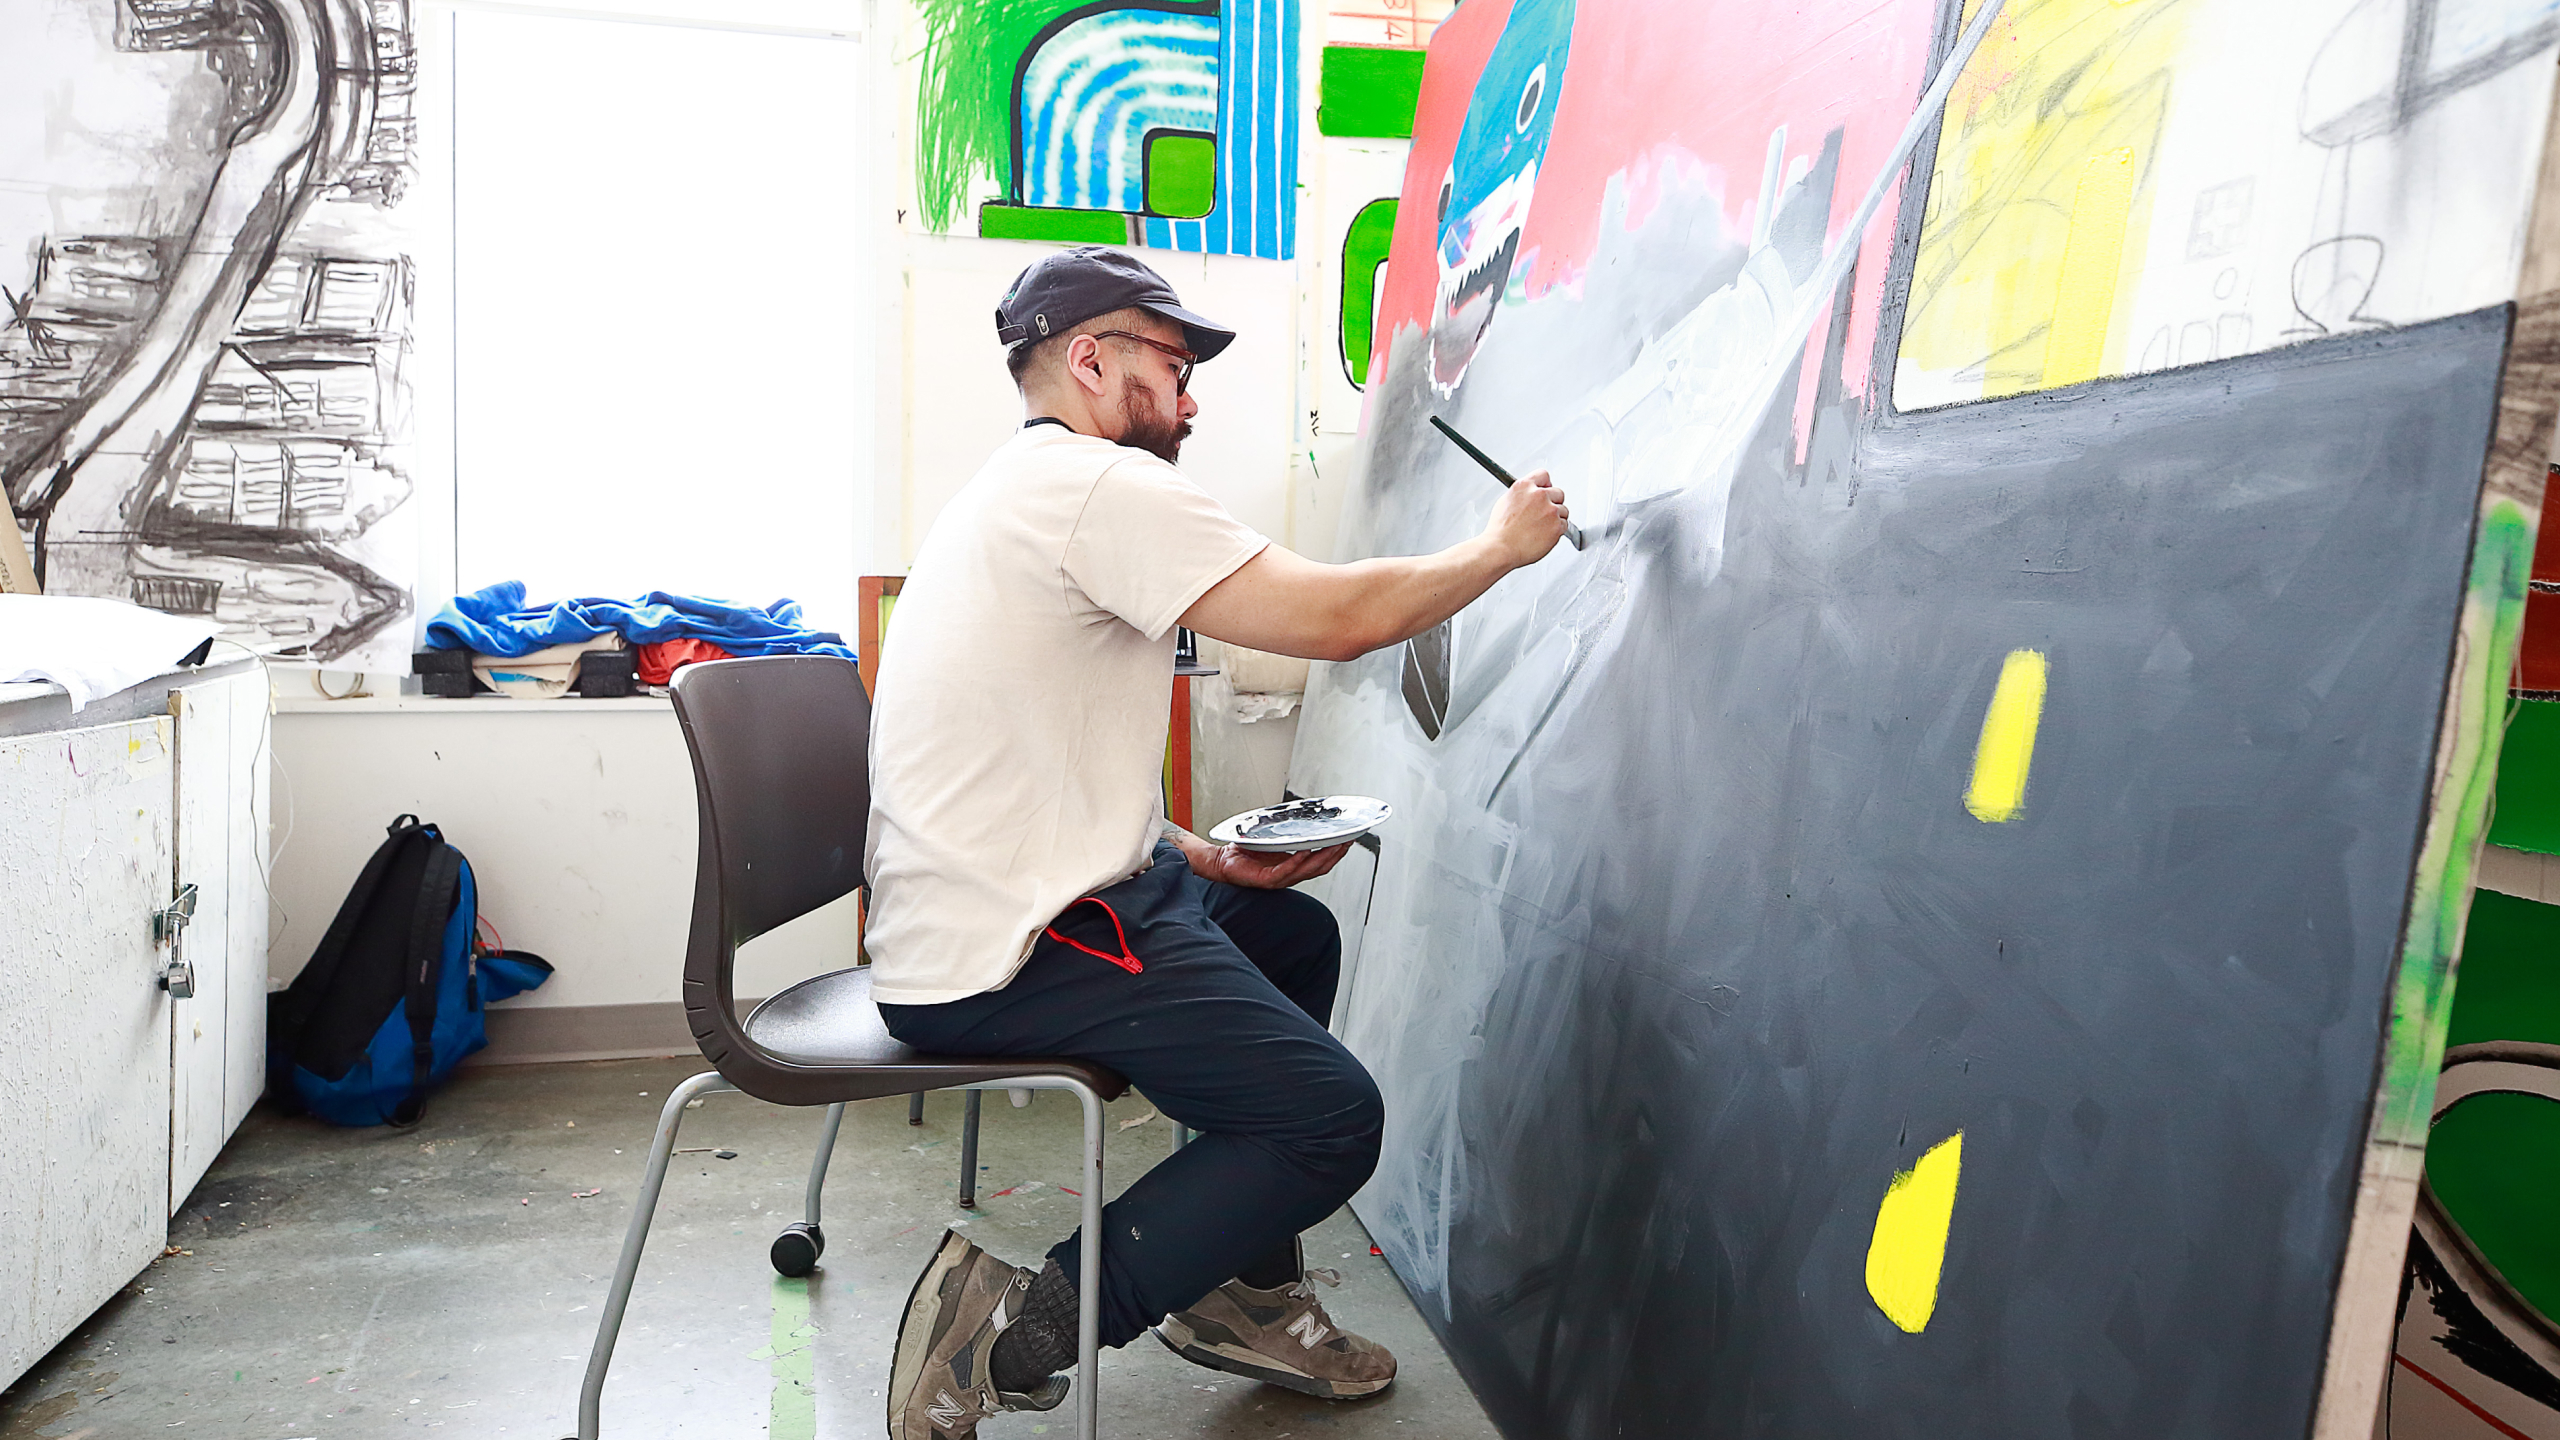 A student works on a large painting in an ECU painting studio.